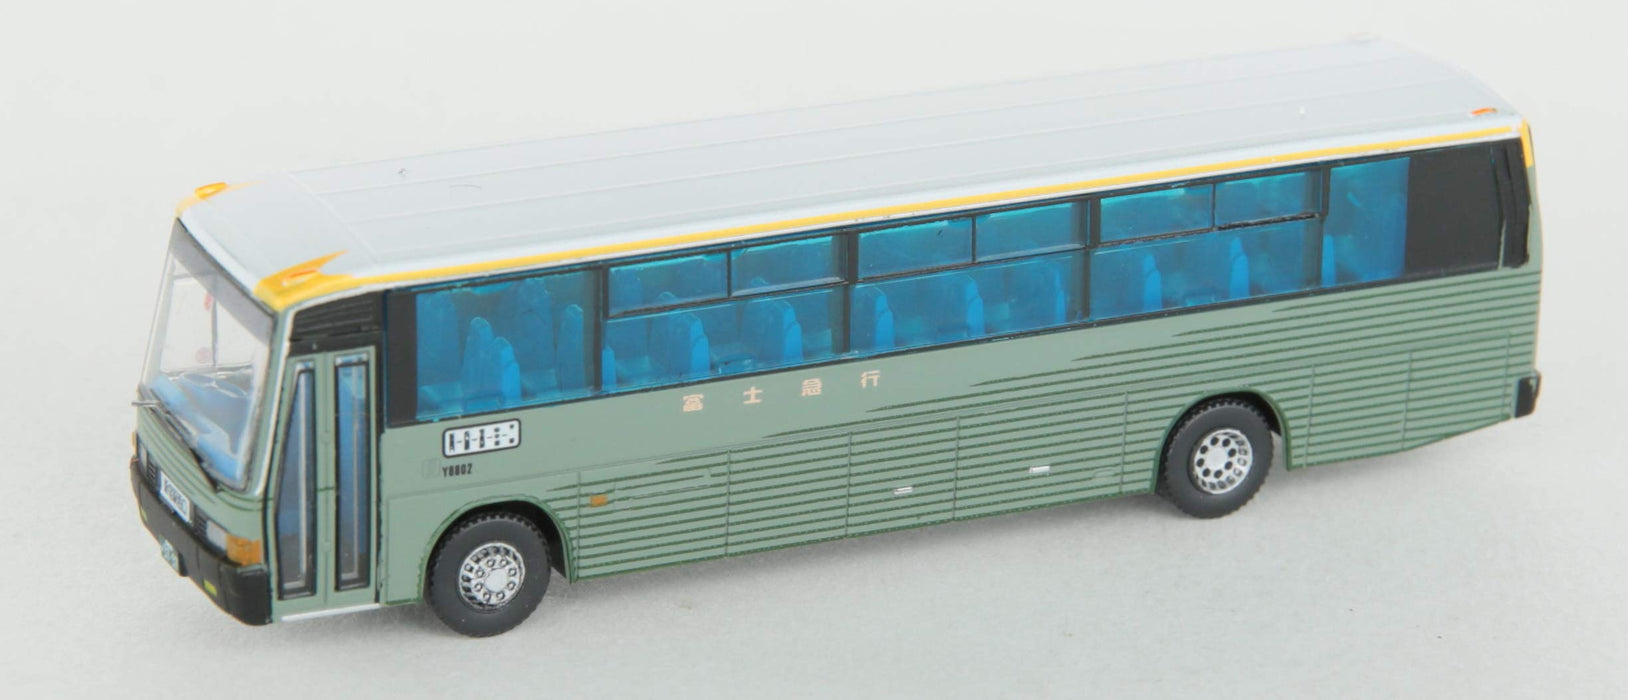 Tomytec 50th Anniversary Chuo Expressway Bus Collection Set of 2 - Limited Edition Diorama Supplies